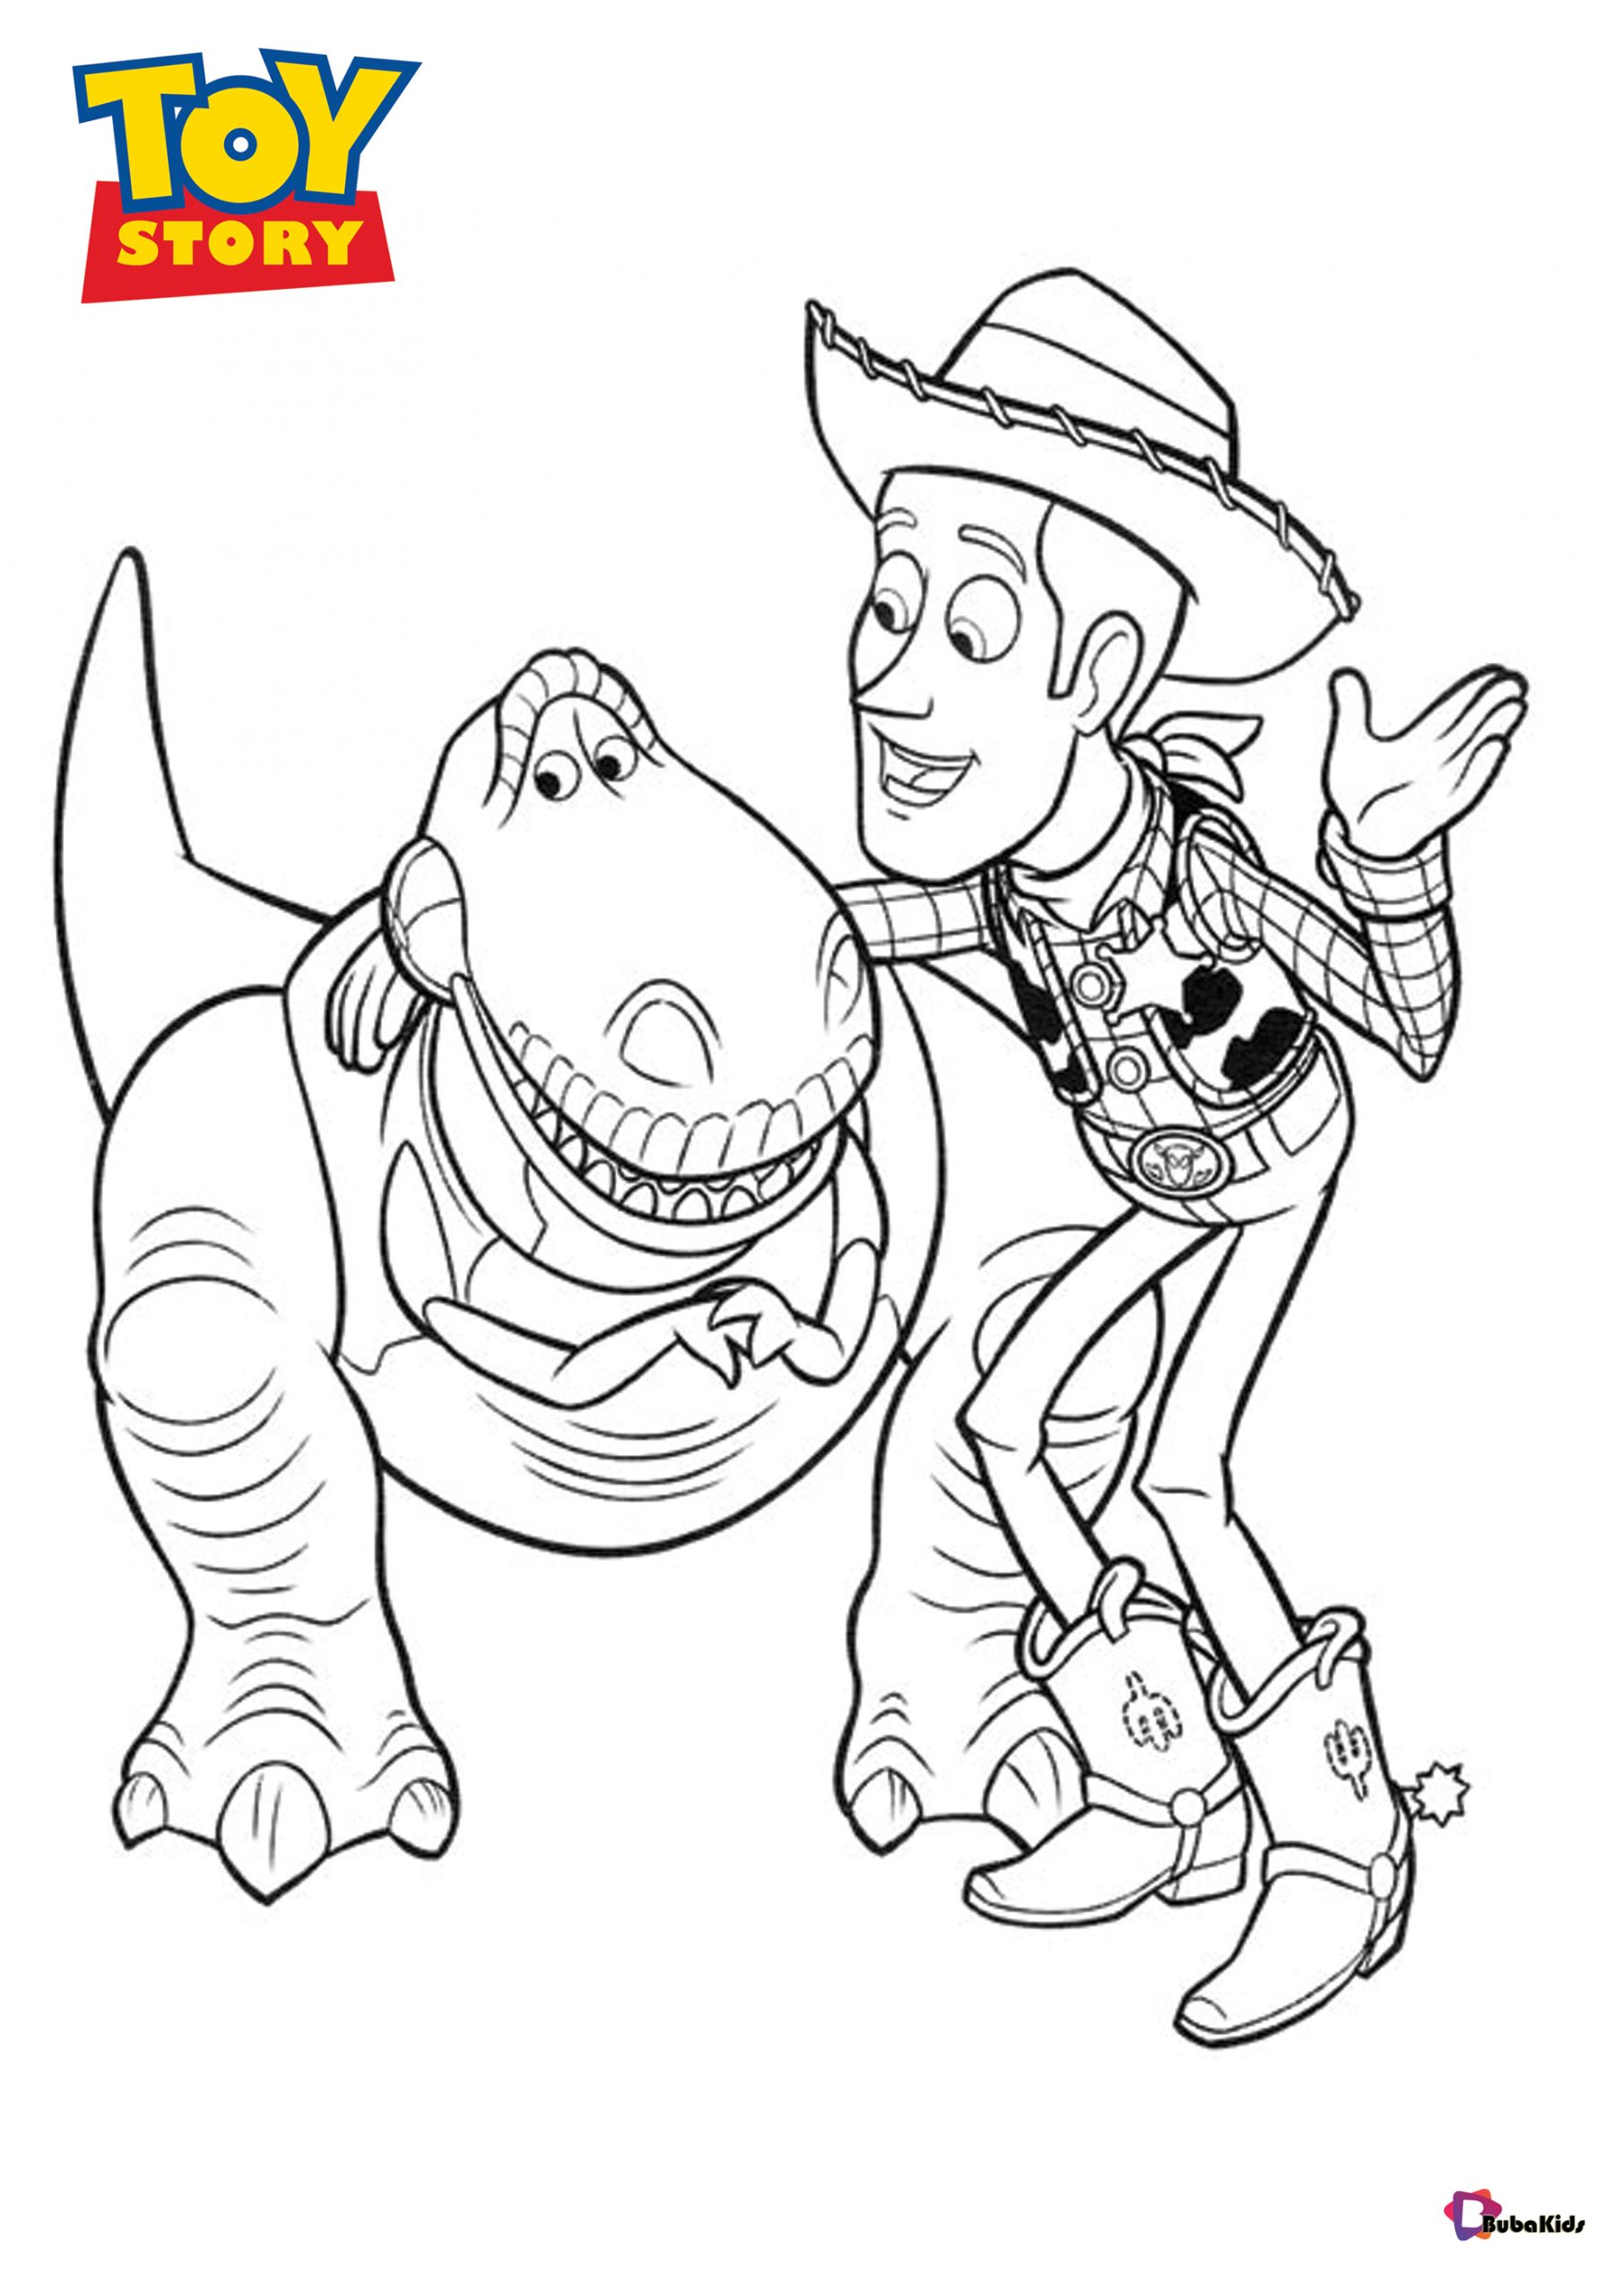 Sheriff Woody and Rex Toy Story characters coloring pages